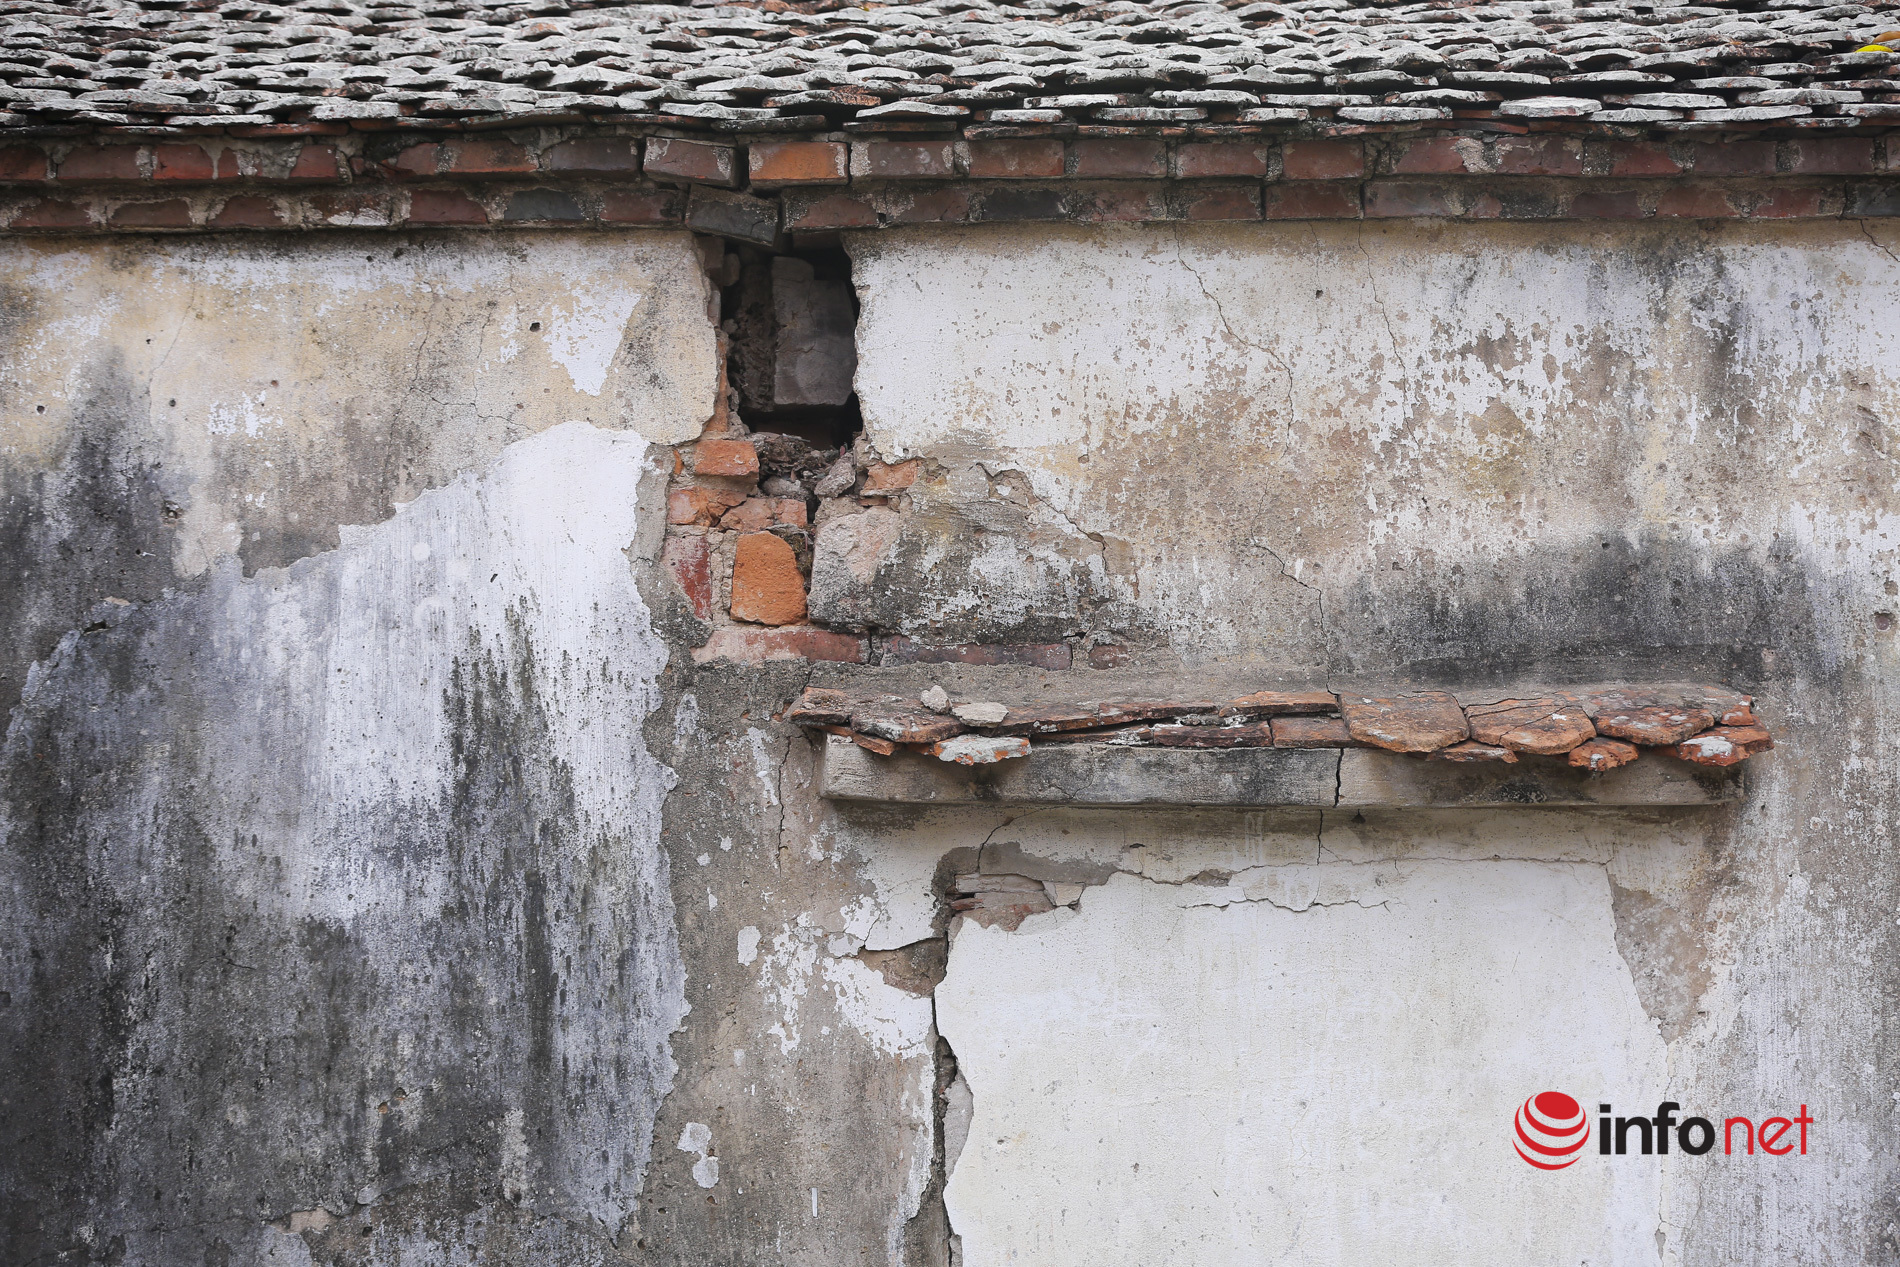 The 700-year-old ancient pagoda on the outskirts of Hanoi is in danger of collapsing